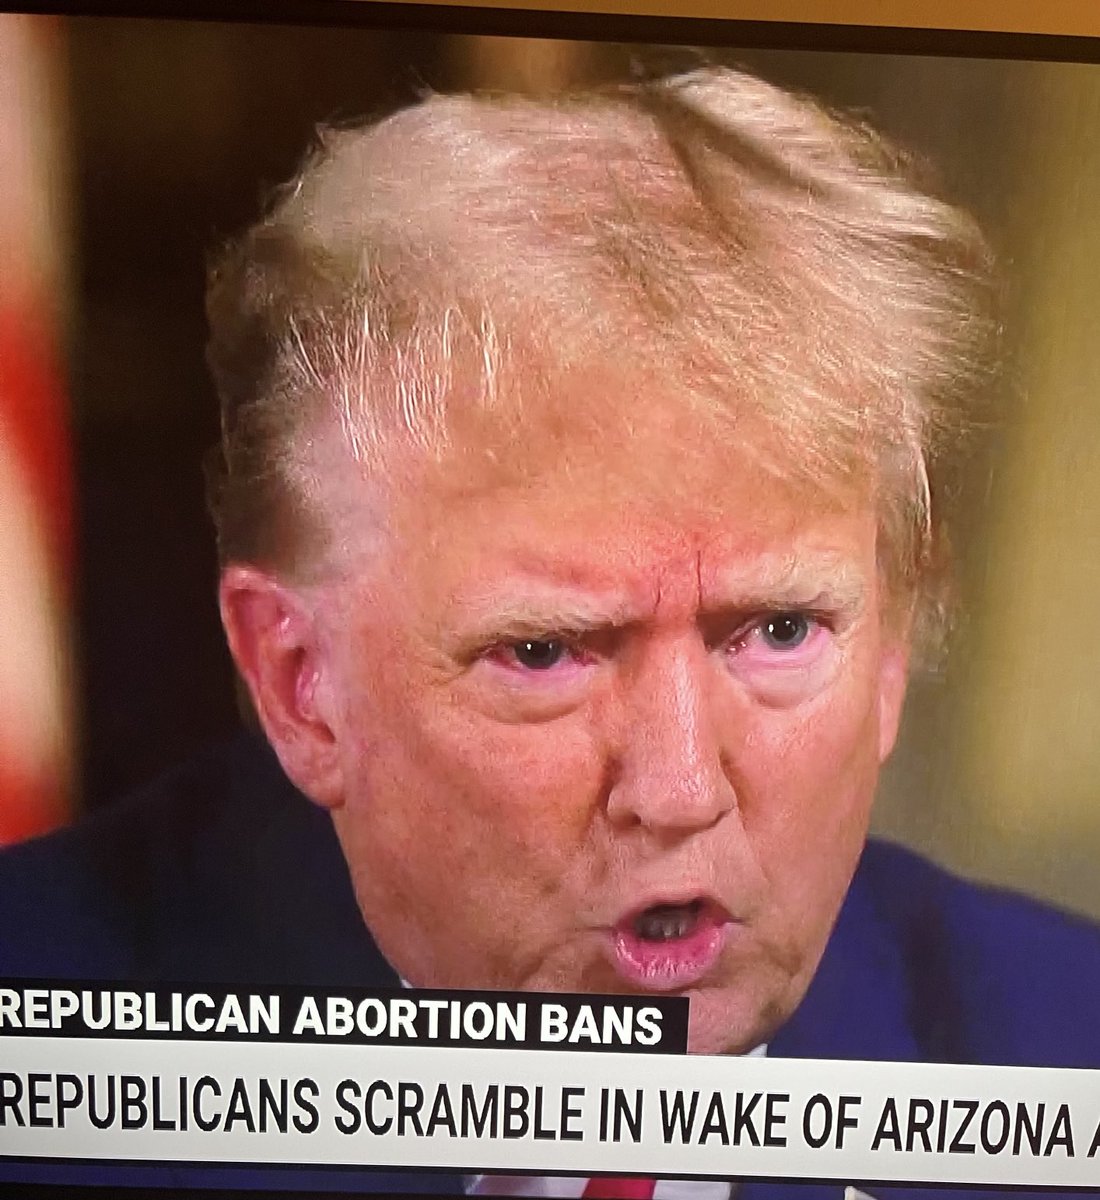 Dead-eyed Donnie lies about being pro-life & anti-abortion. How do I know? Its grotesque circle-lips are moving.